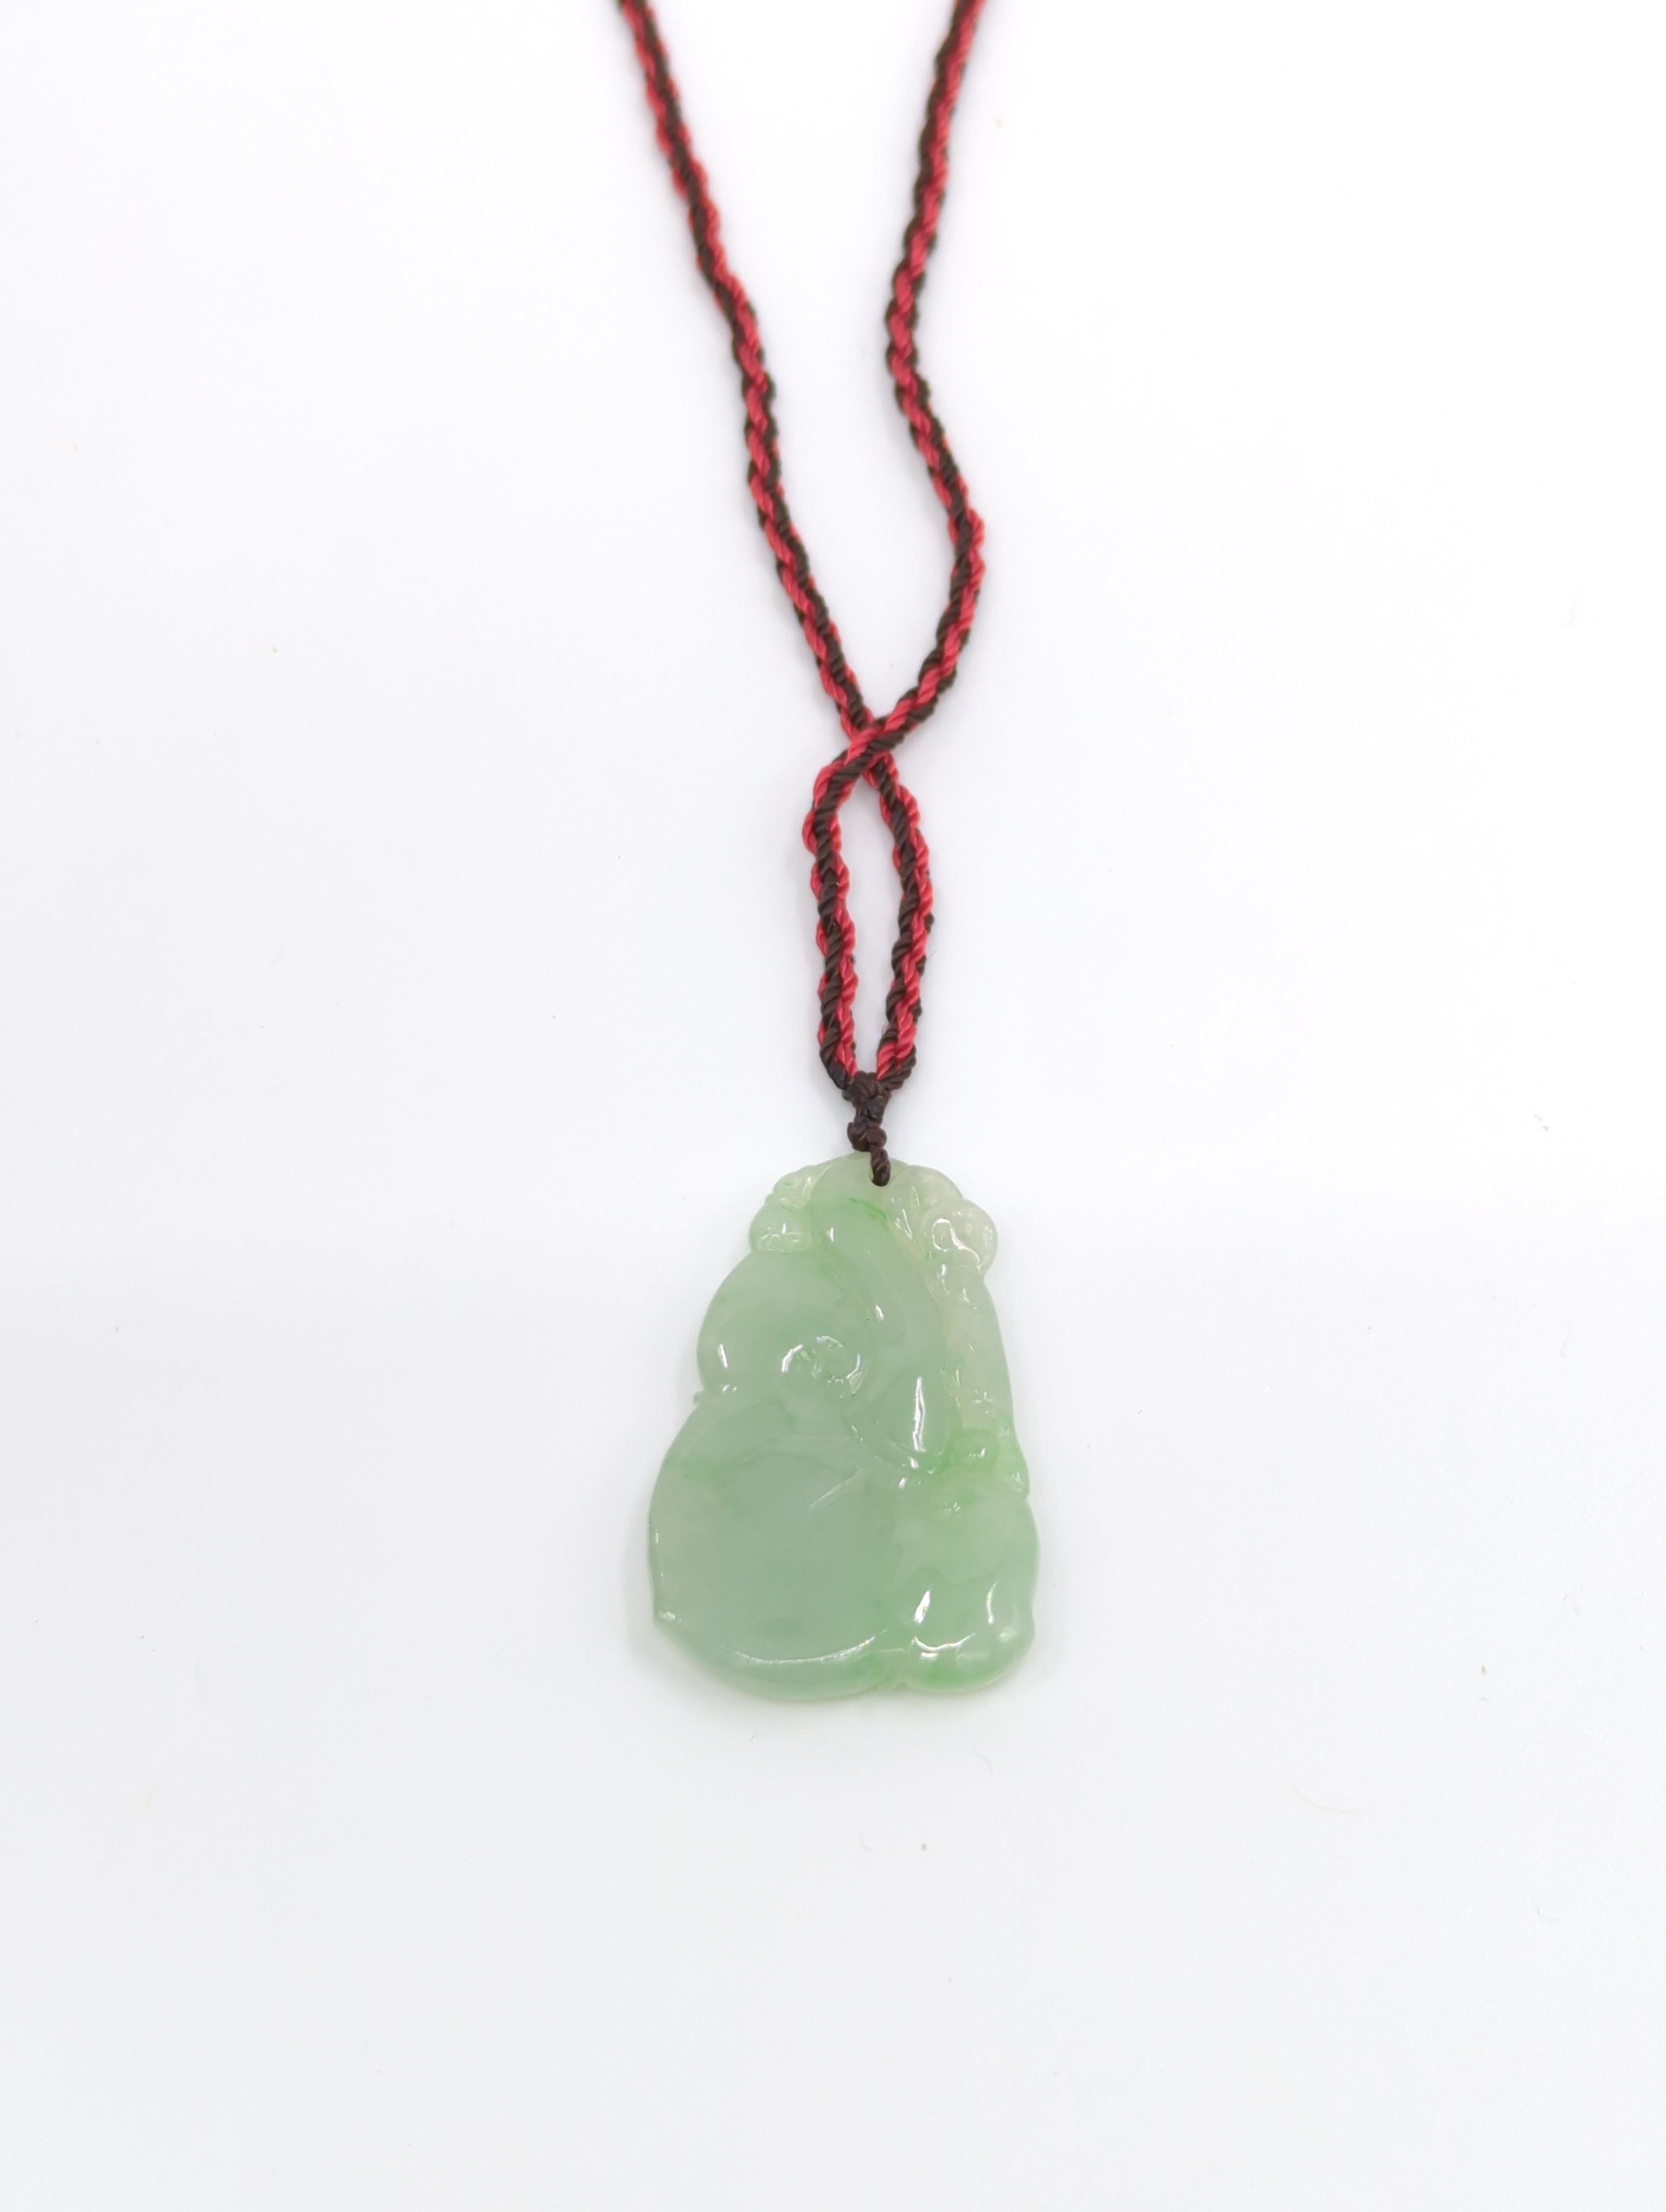 Chinese Carved Light Green Ruyi Jadeite Pendant Necklace A-Grade 18-24